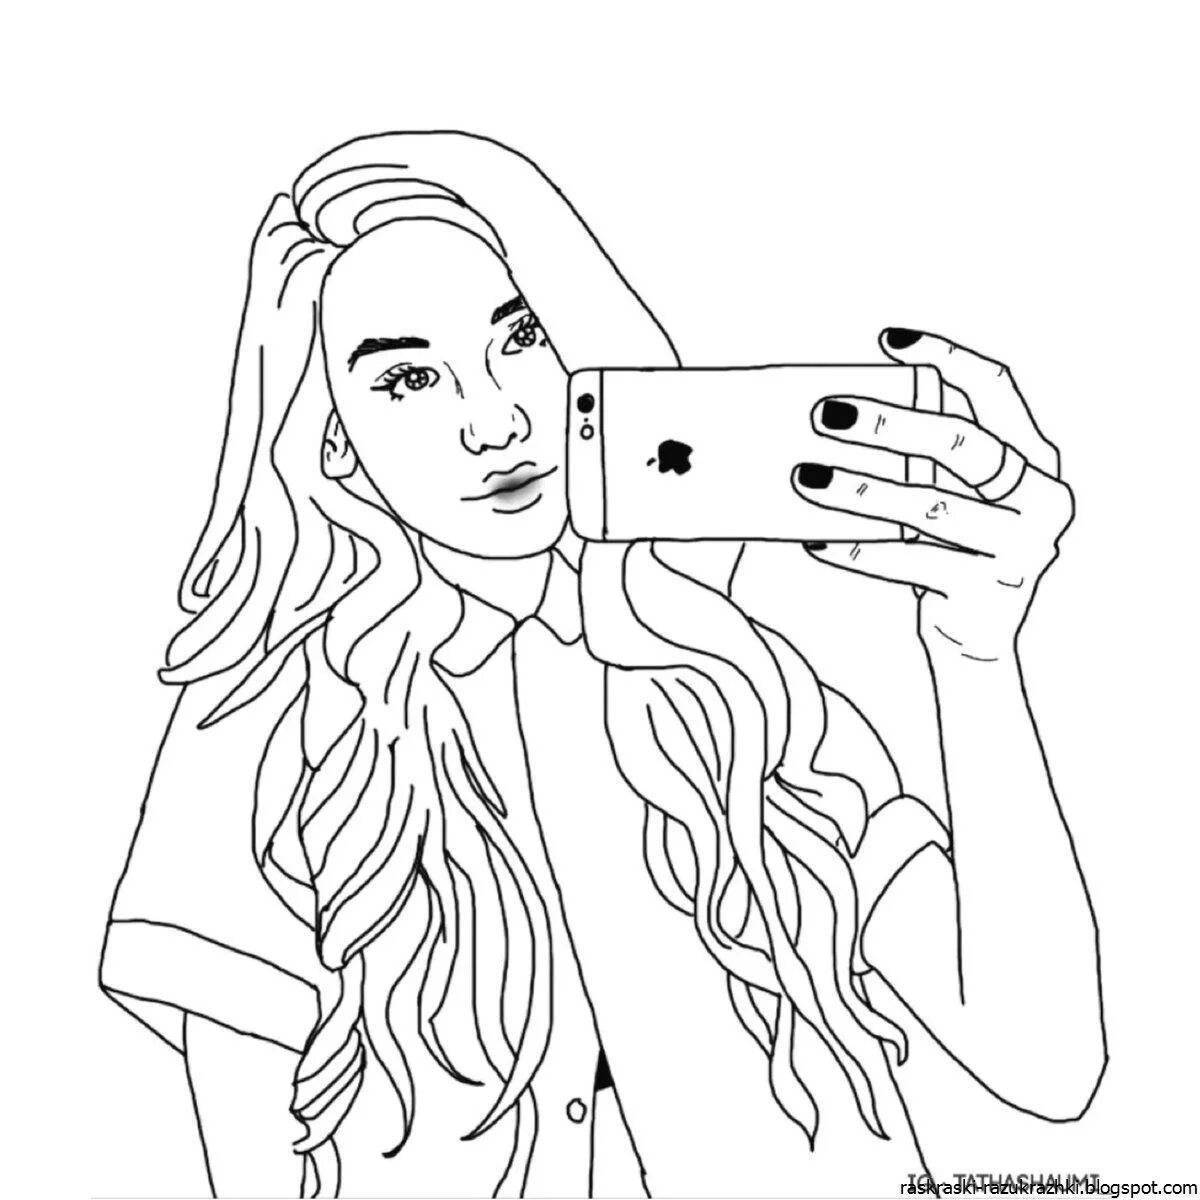 Cute phone coloring for girls